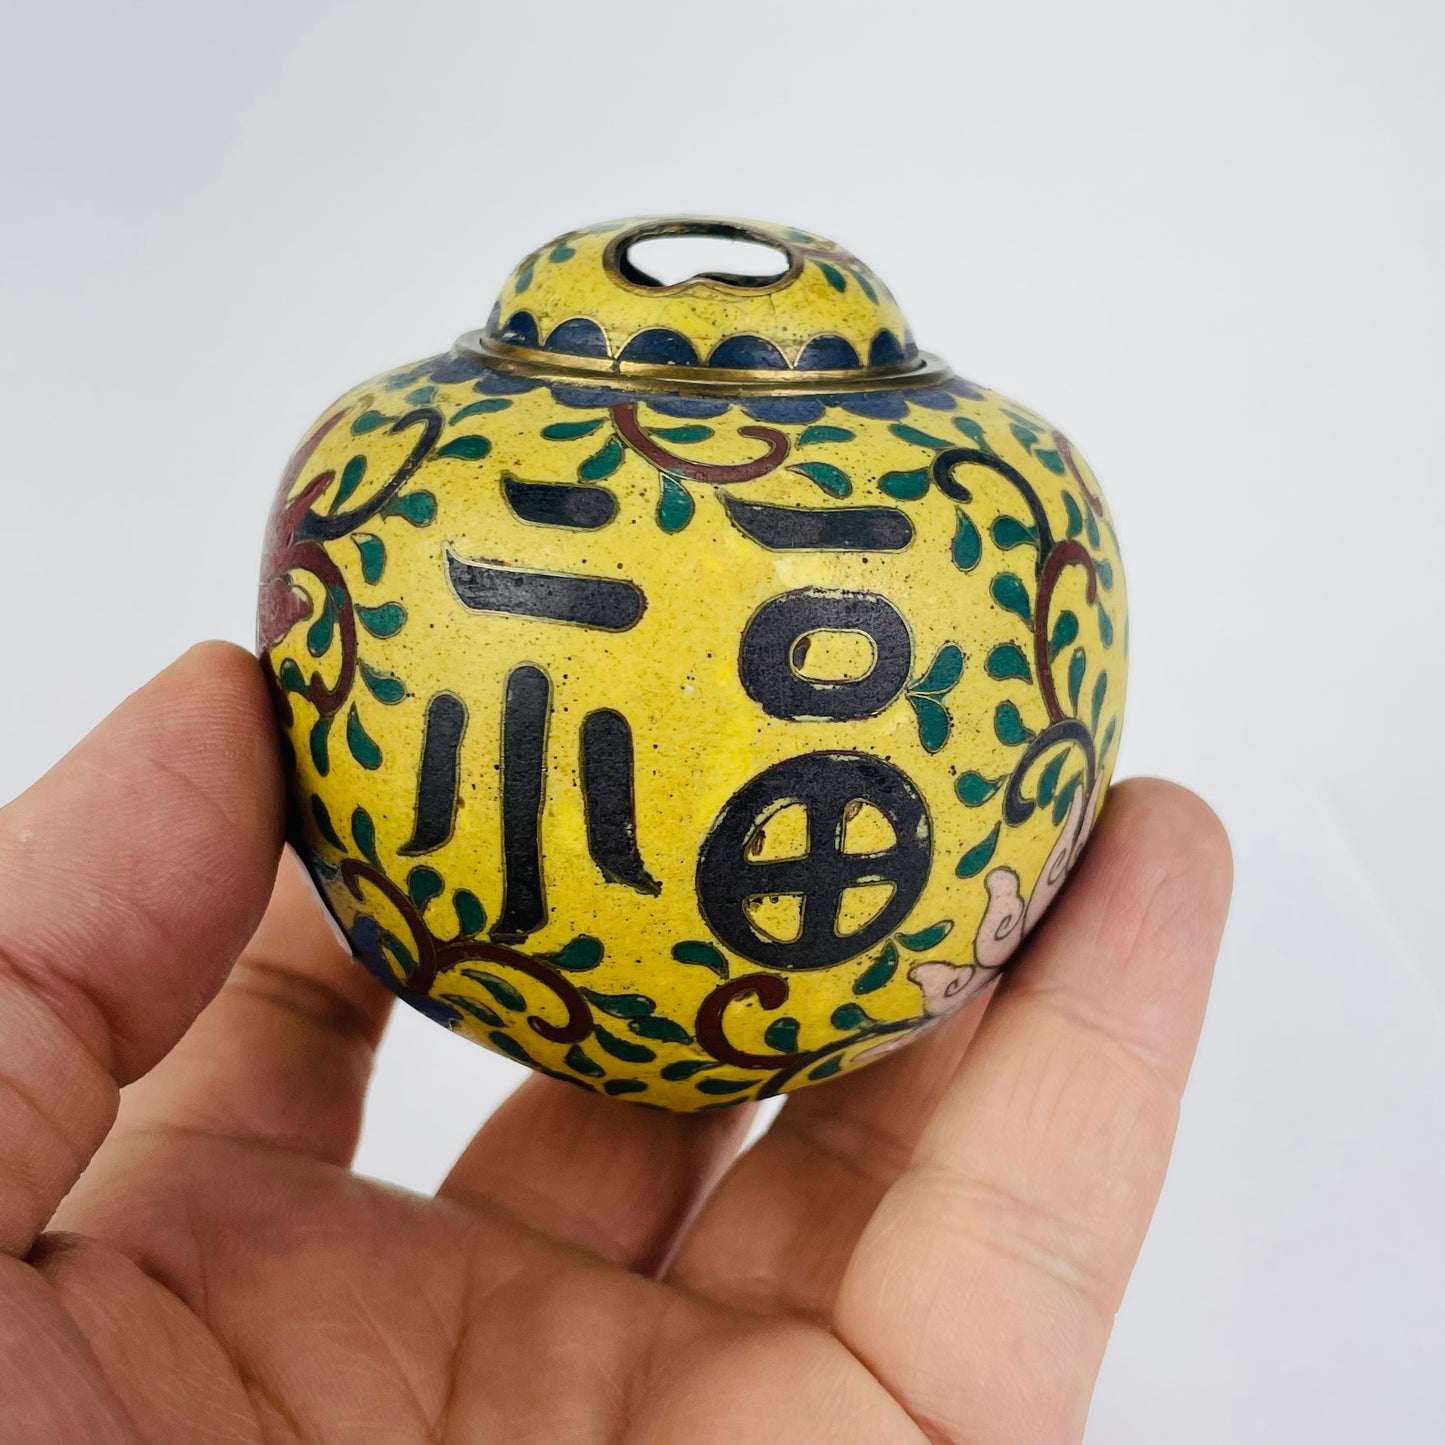 Antique Chinese Yellow Cloisonné Koro Censer for Incense 3”